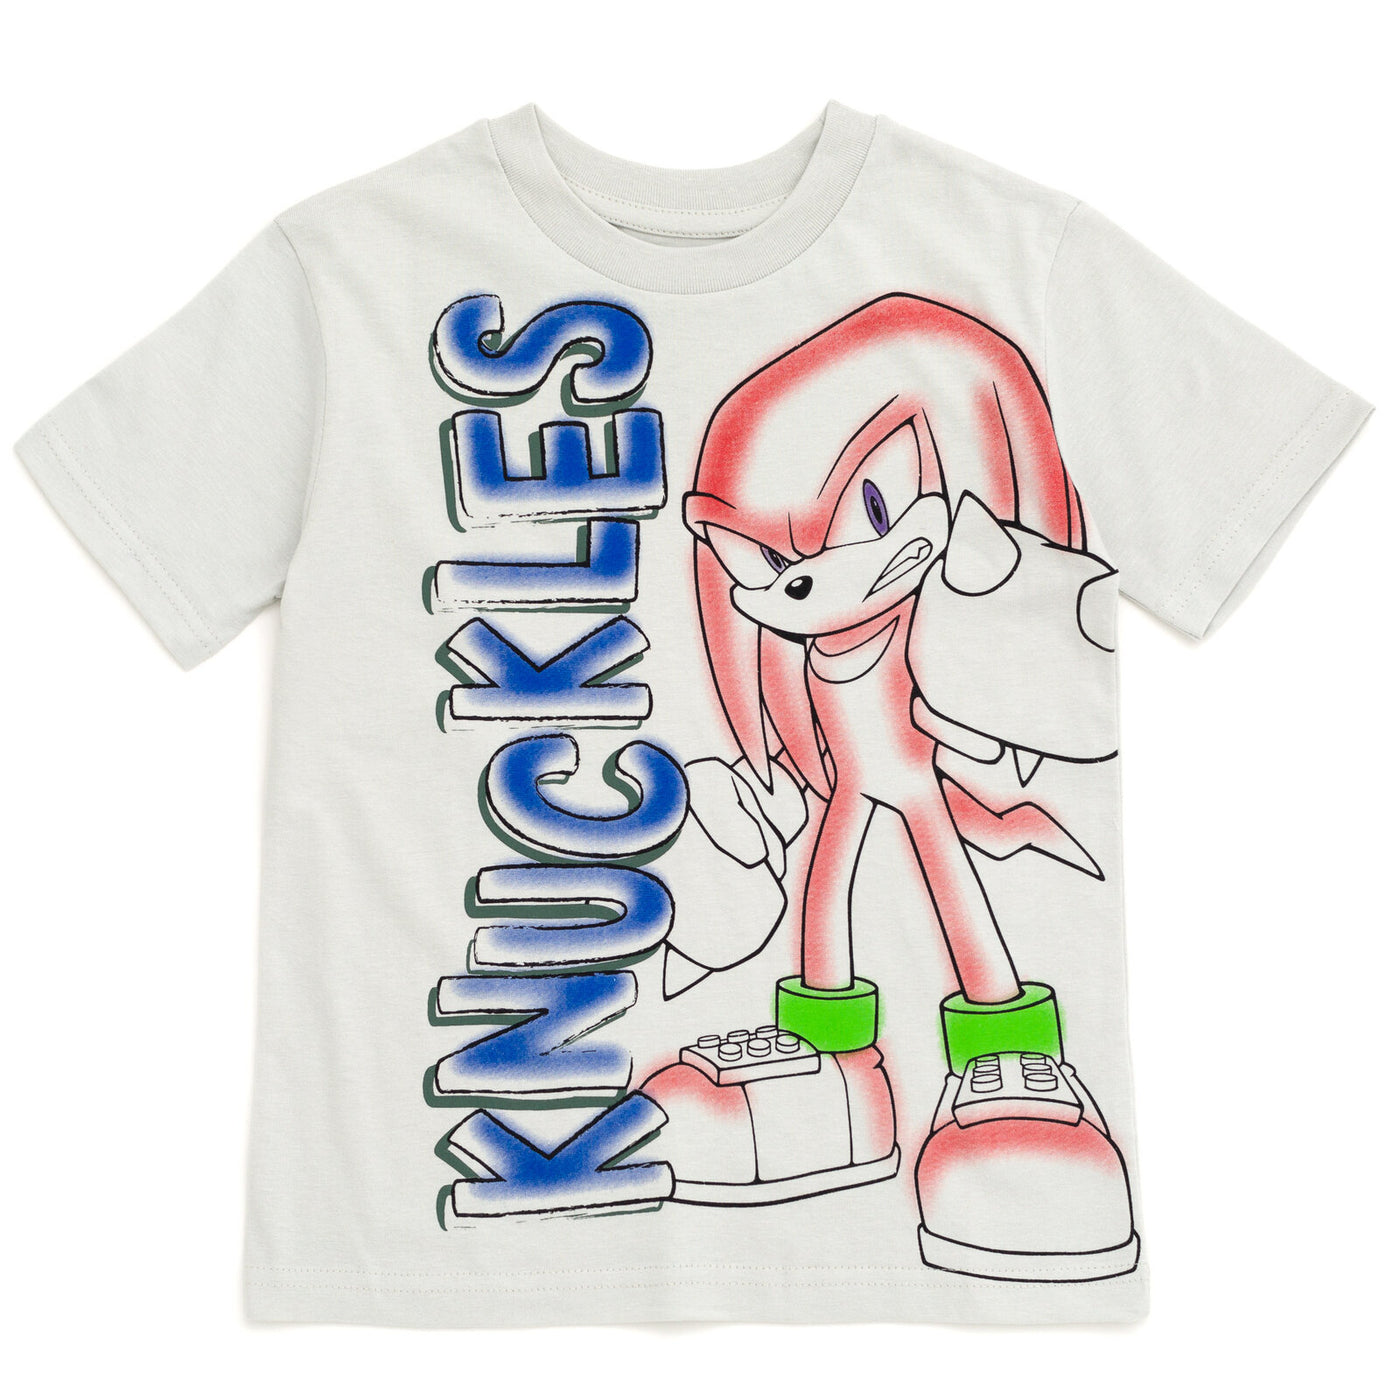 SEGA Sonic the Hedgehog Tails Shadow Knuckles 4 Pack T-Shirts